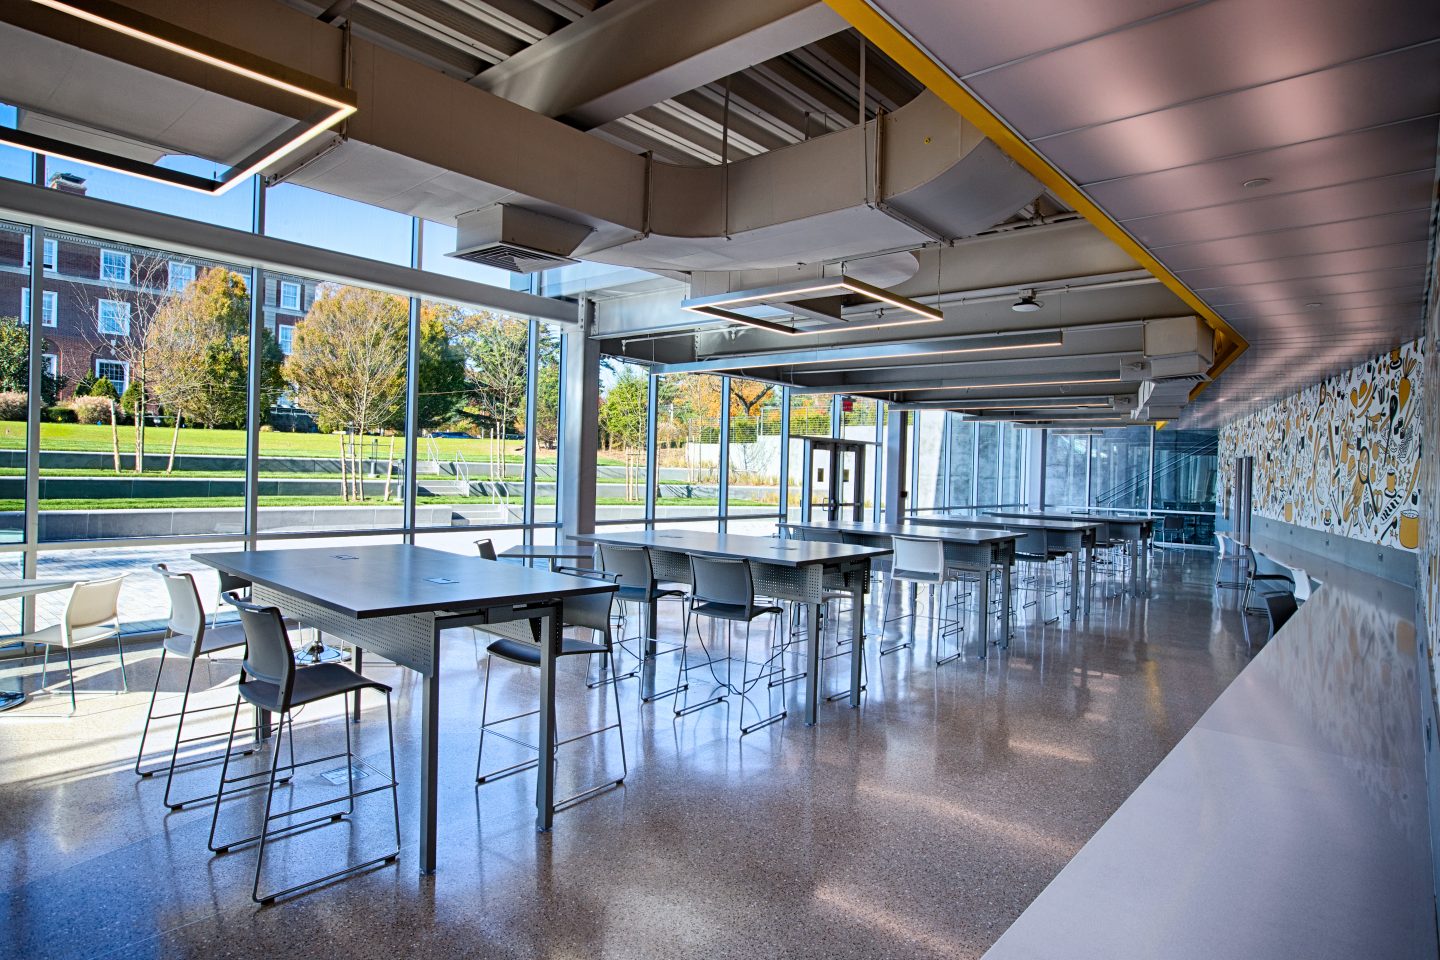 Seating areas in the UC Dining Hall on the Lower Level